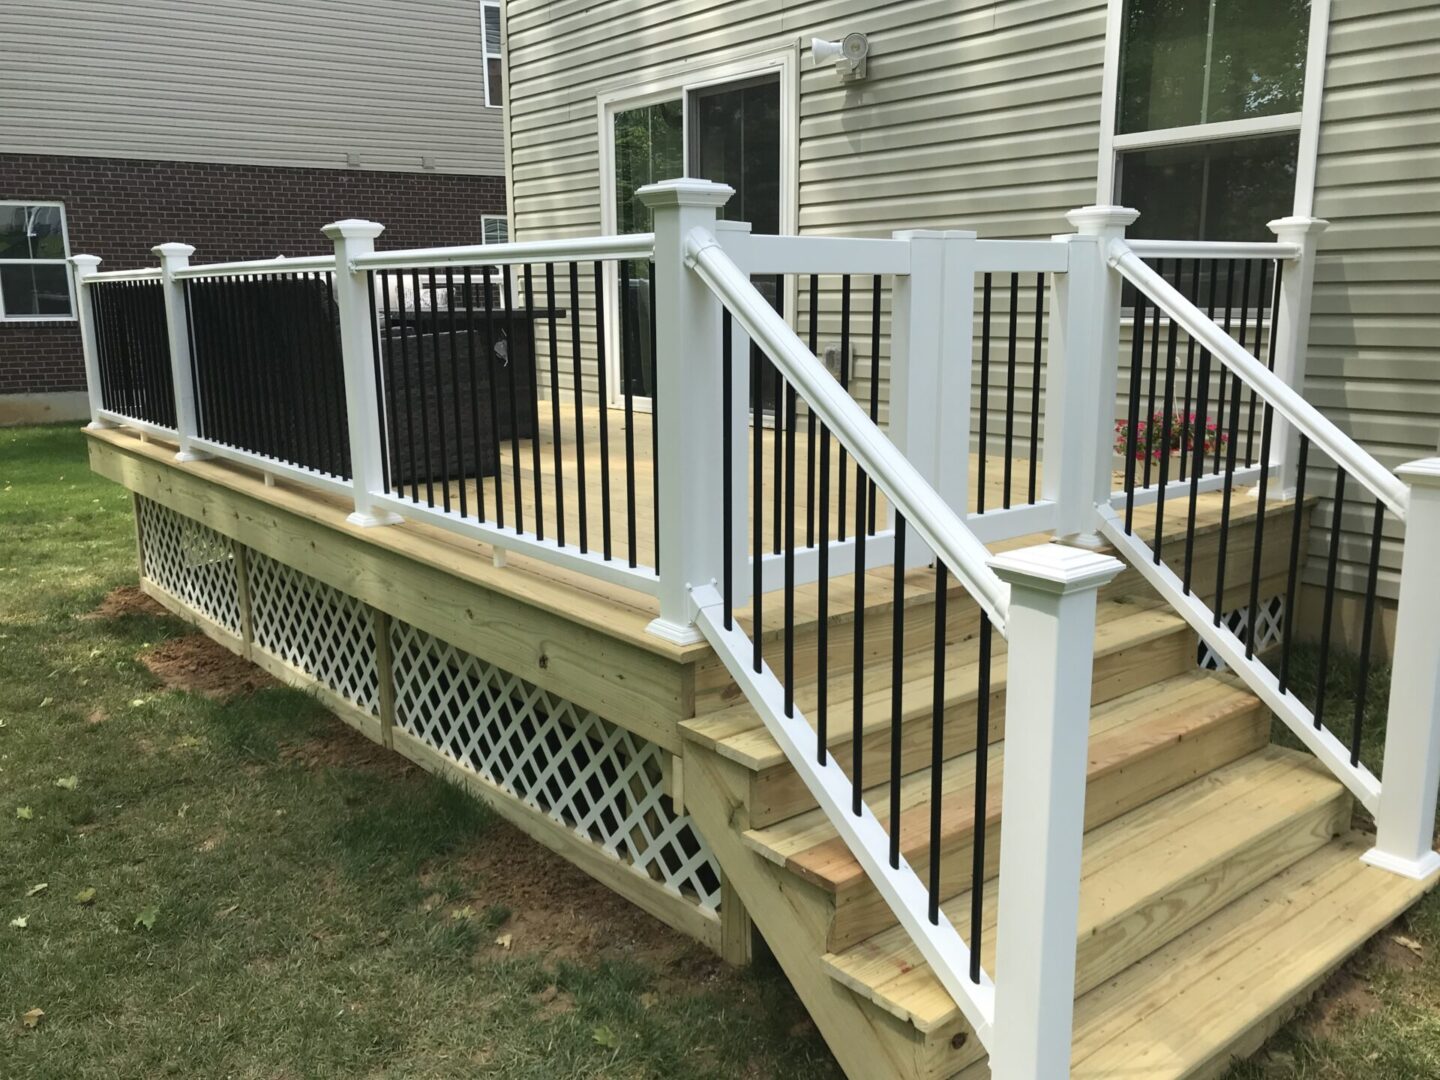 A deck with stairs and railing in the back yard.